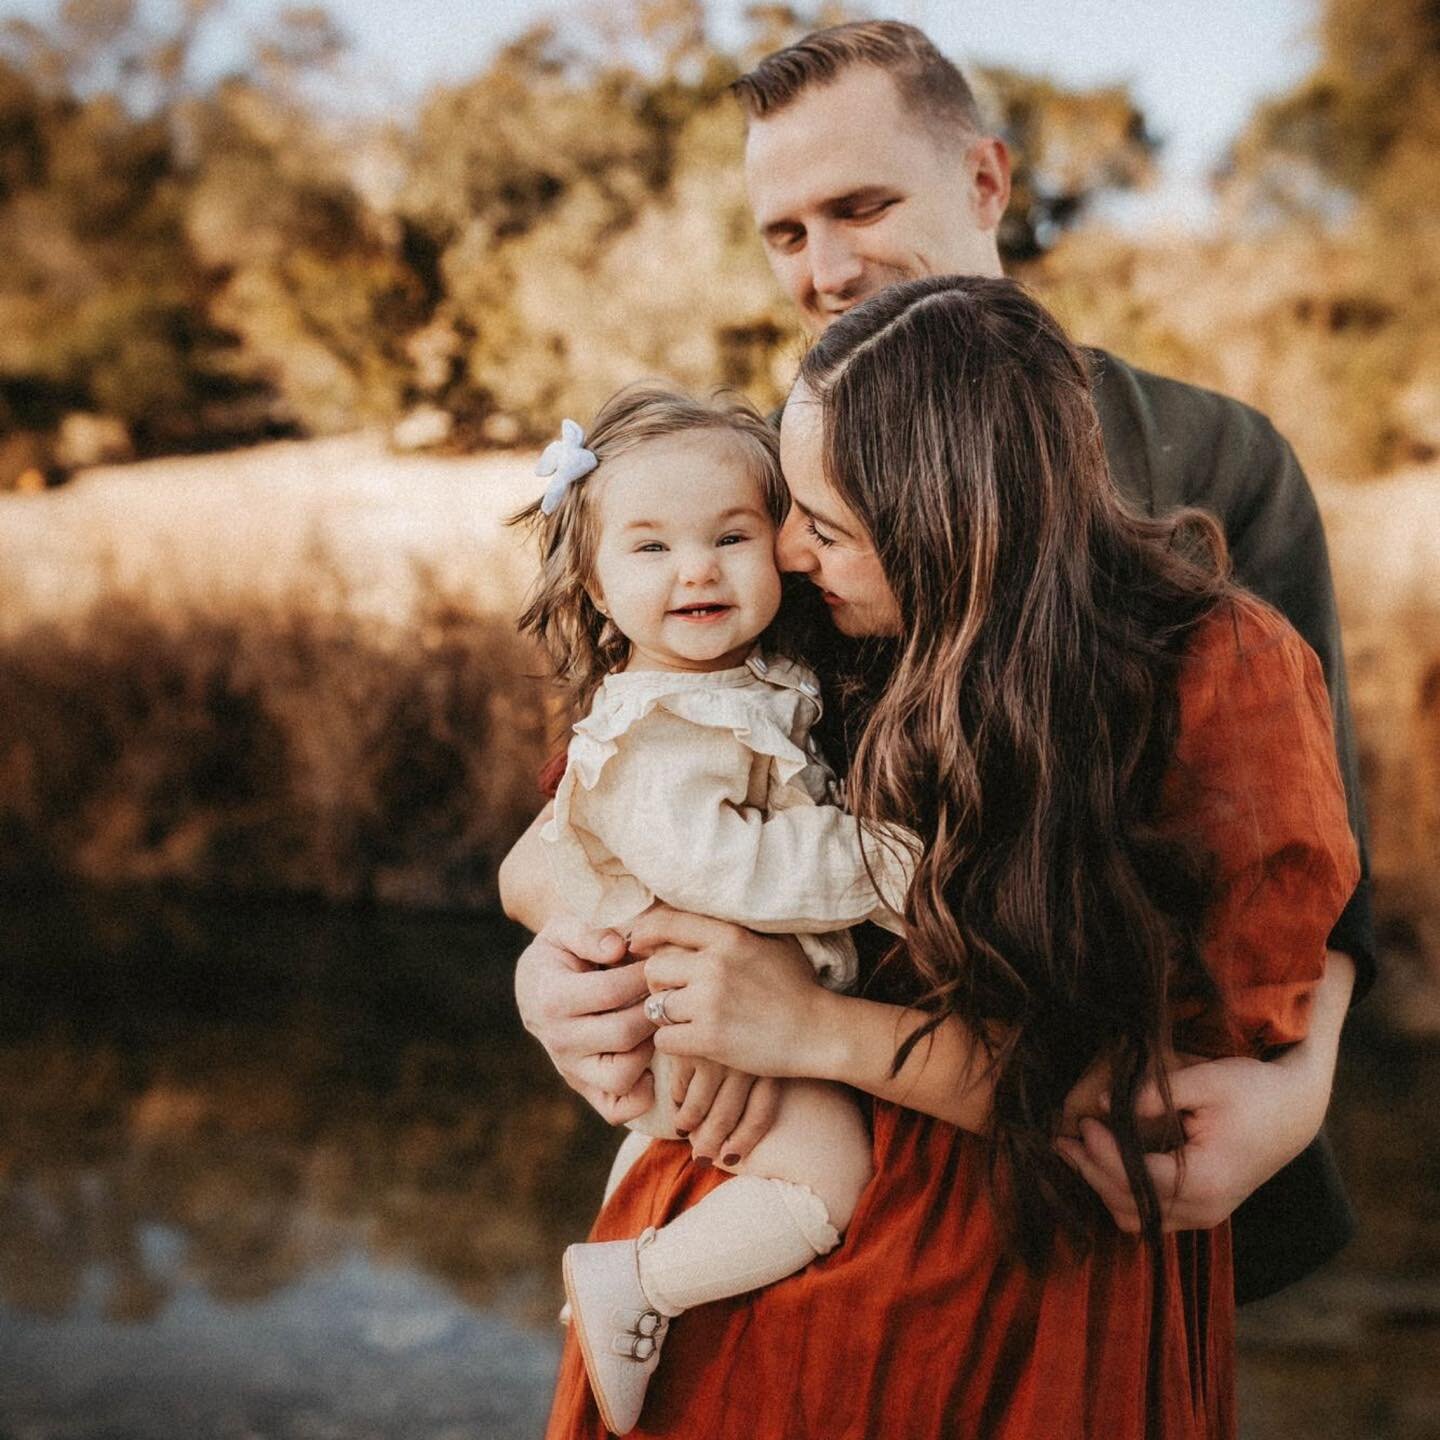 Exciting news, everyone! 🍂 My fall mini sessions are officially live and ready to roll! I'm seriously pumped to reconnect with my awesome returning families and to welcome all you new faces out there. Go ahead and take a peek &ndash; the link's righ